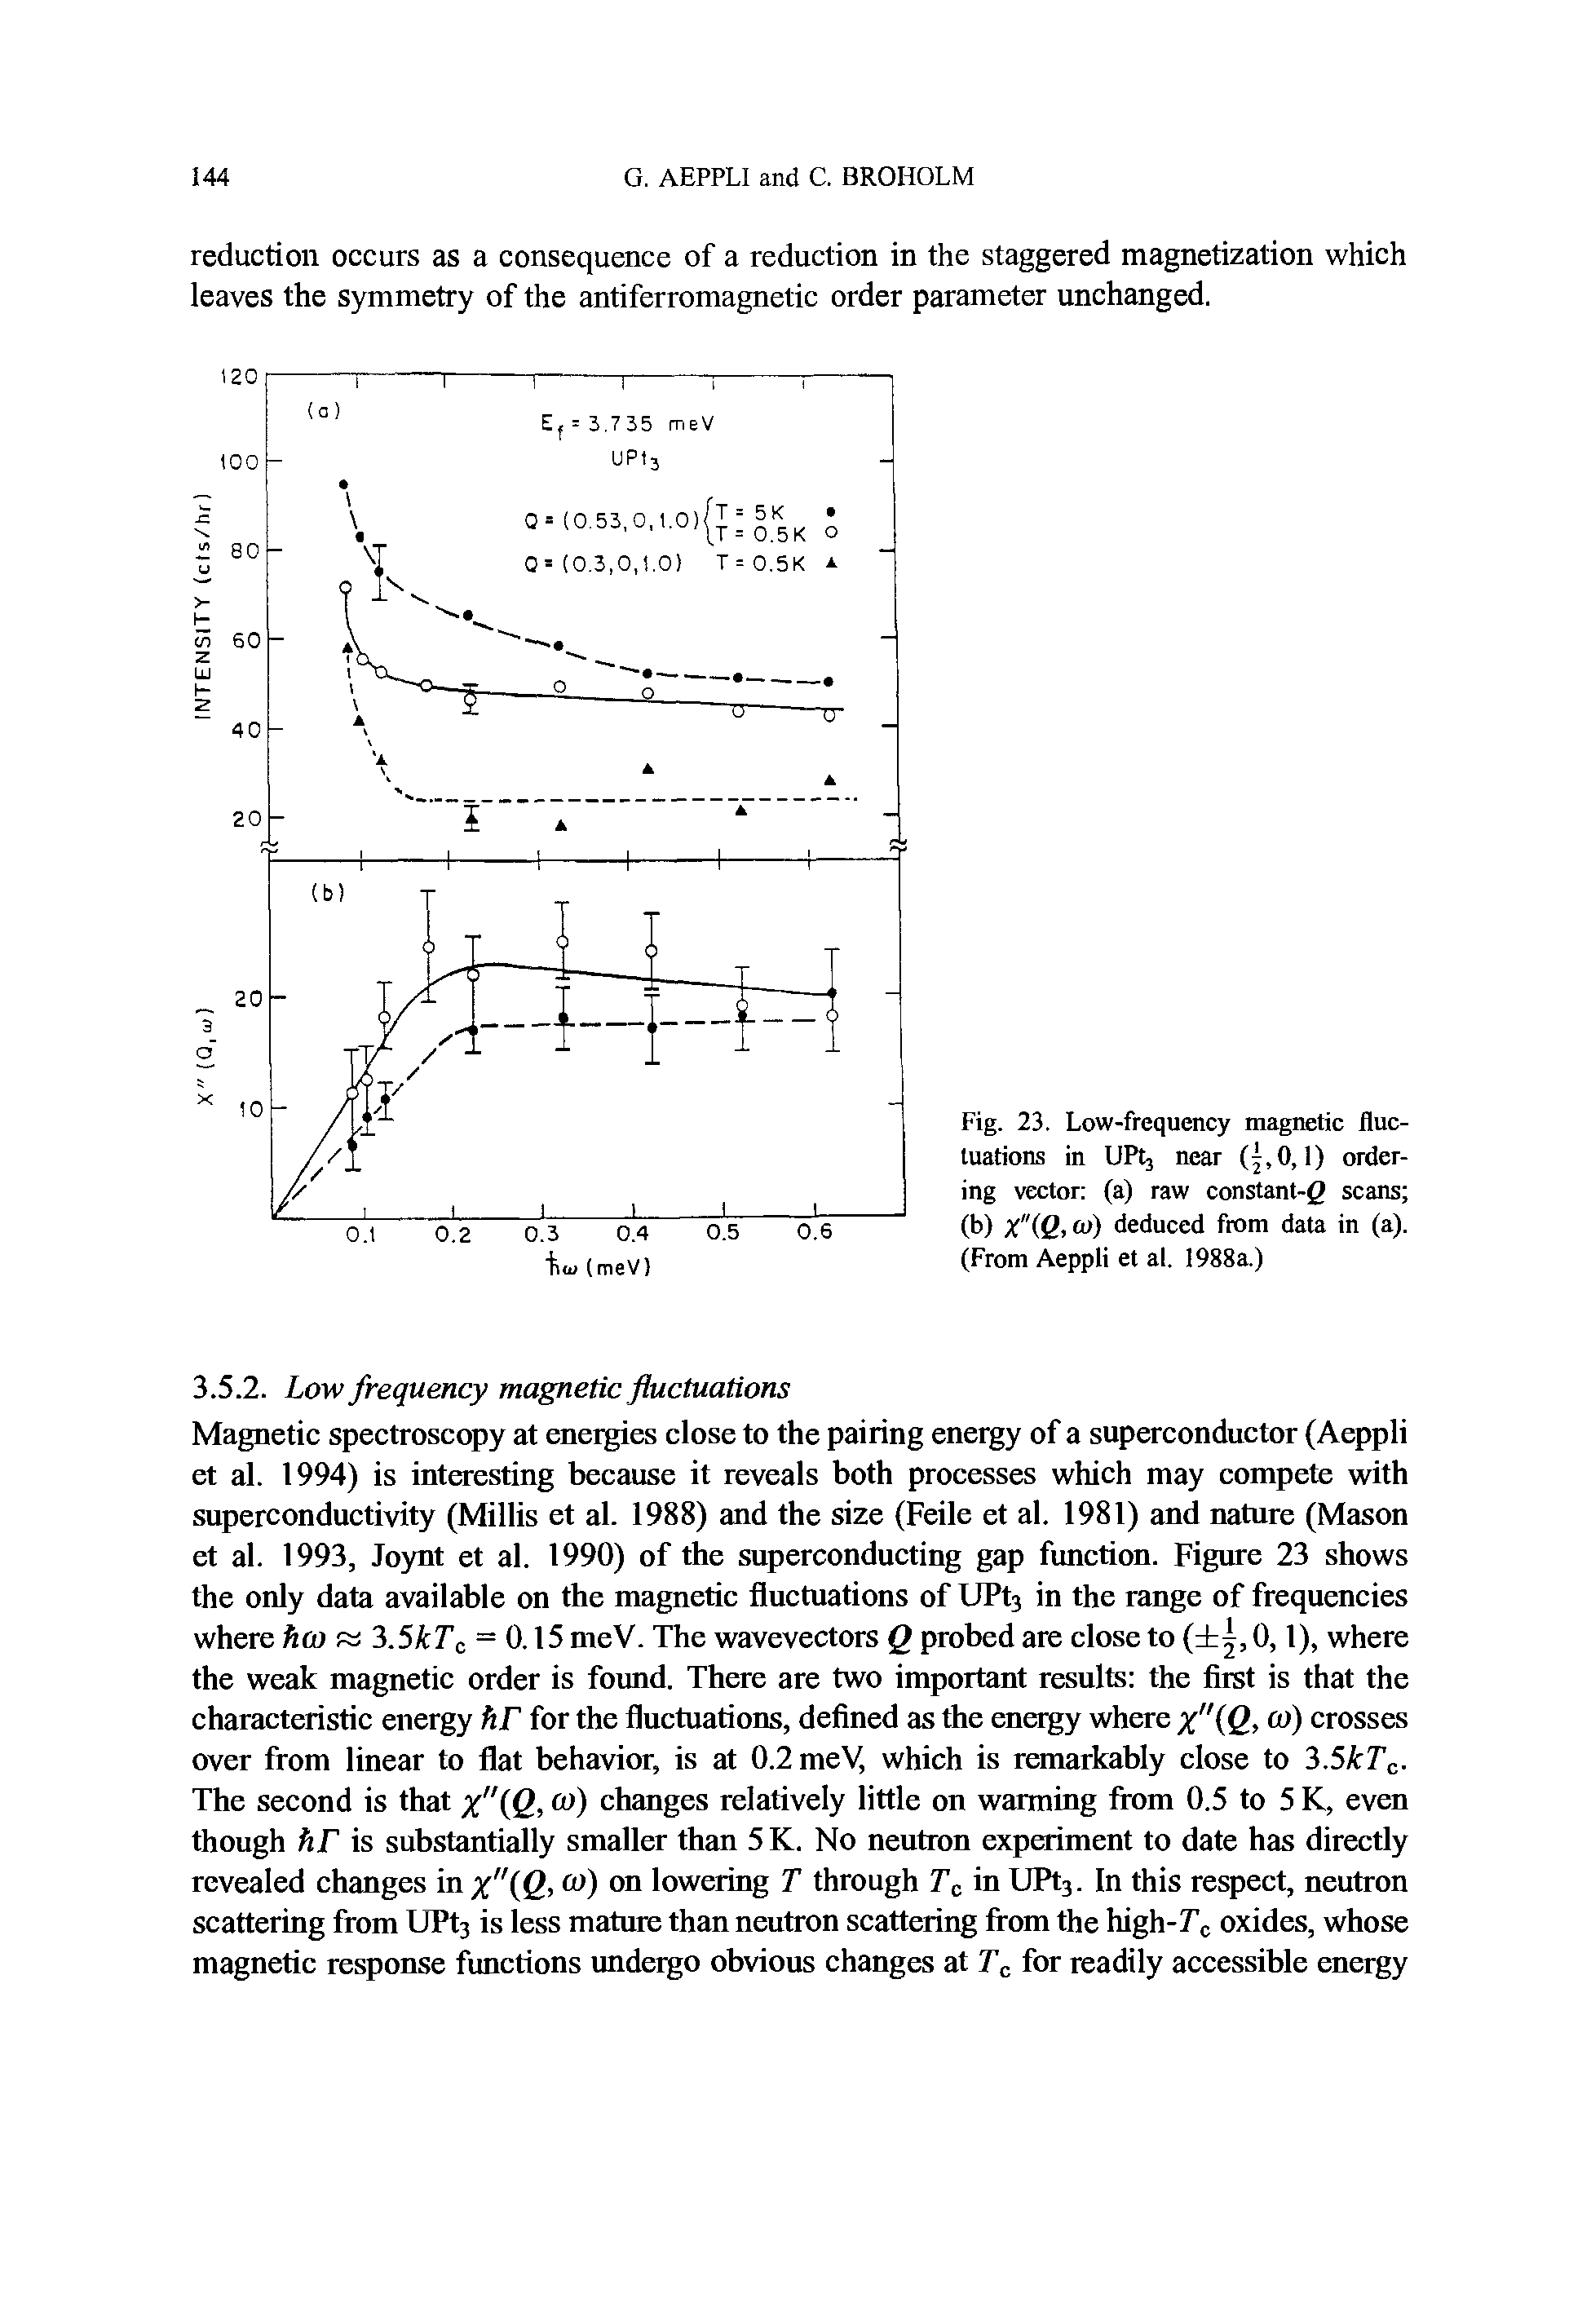 Fig. 23. Low-frequency magnetic fluctuations in UPtj near (, 0,1) ordering vector (a) raw constant-g scans (t>) X"(Q, w) deduced from data in (a). (From Aeppli et al. 1988a.)...